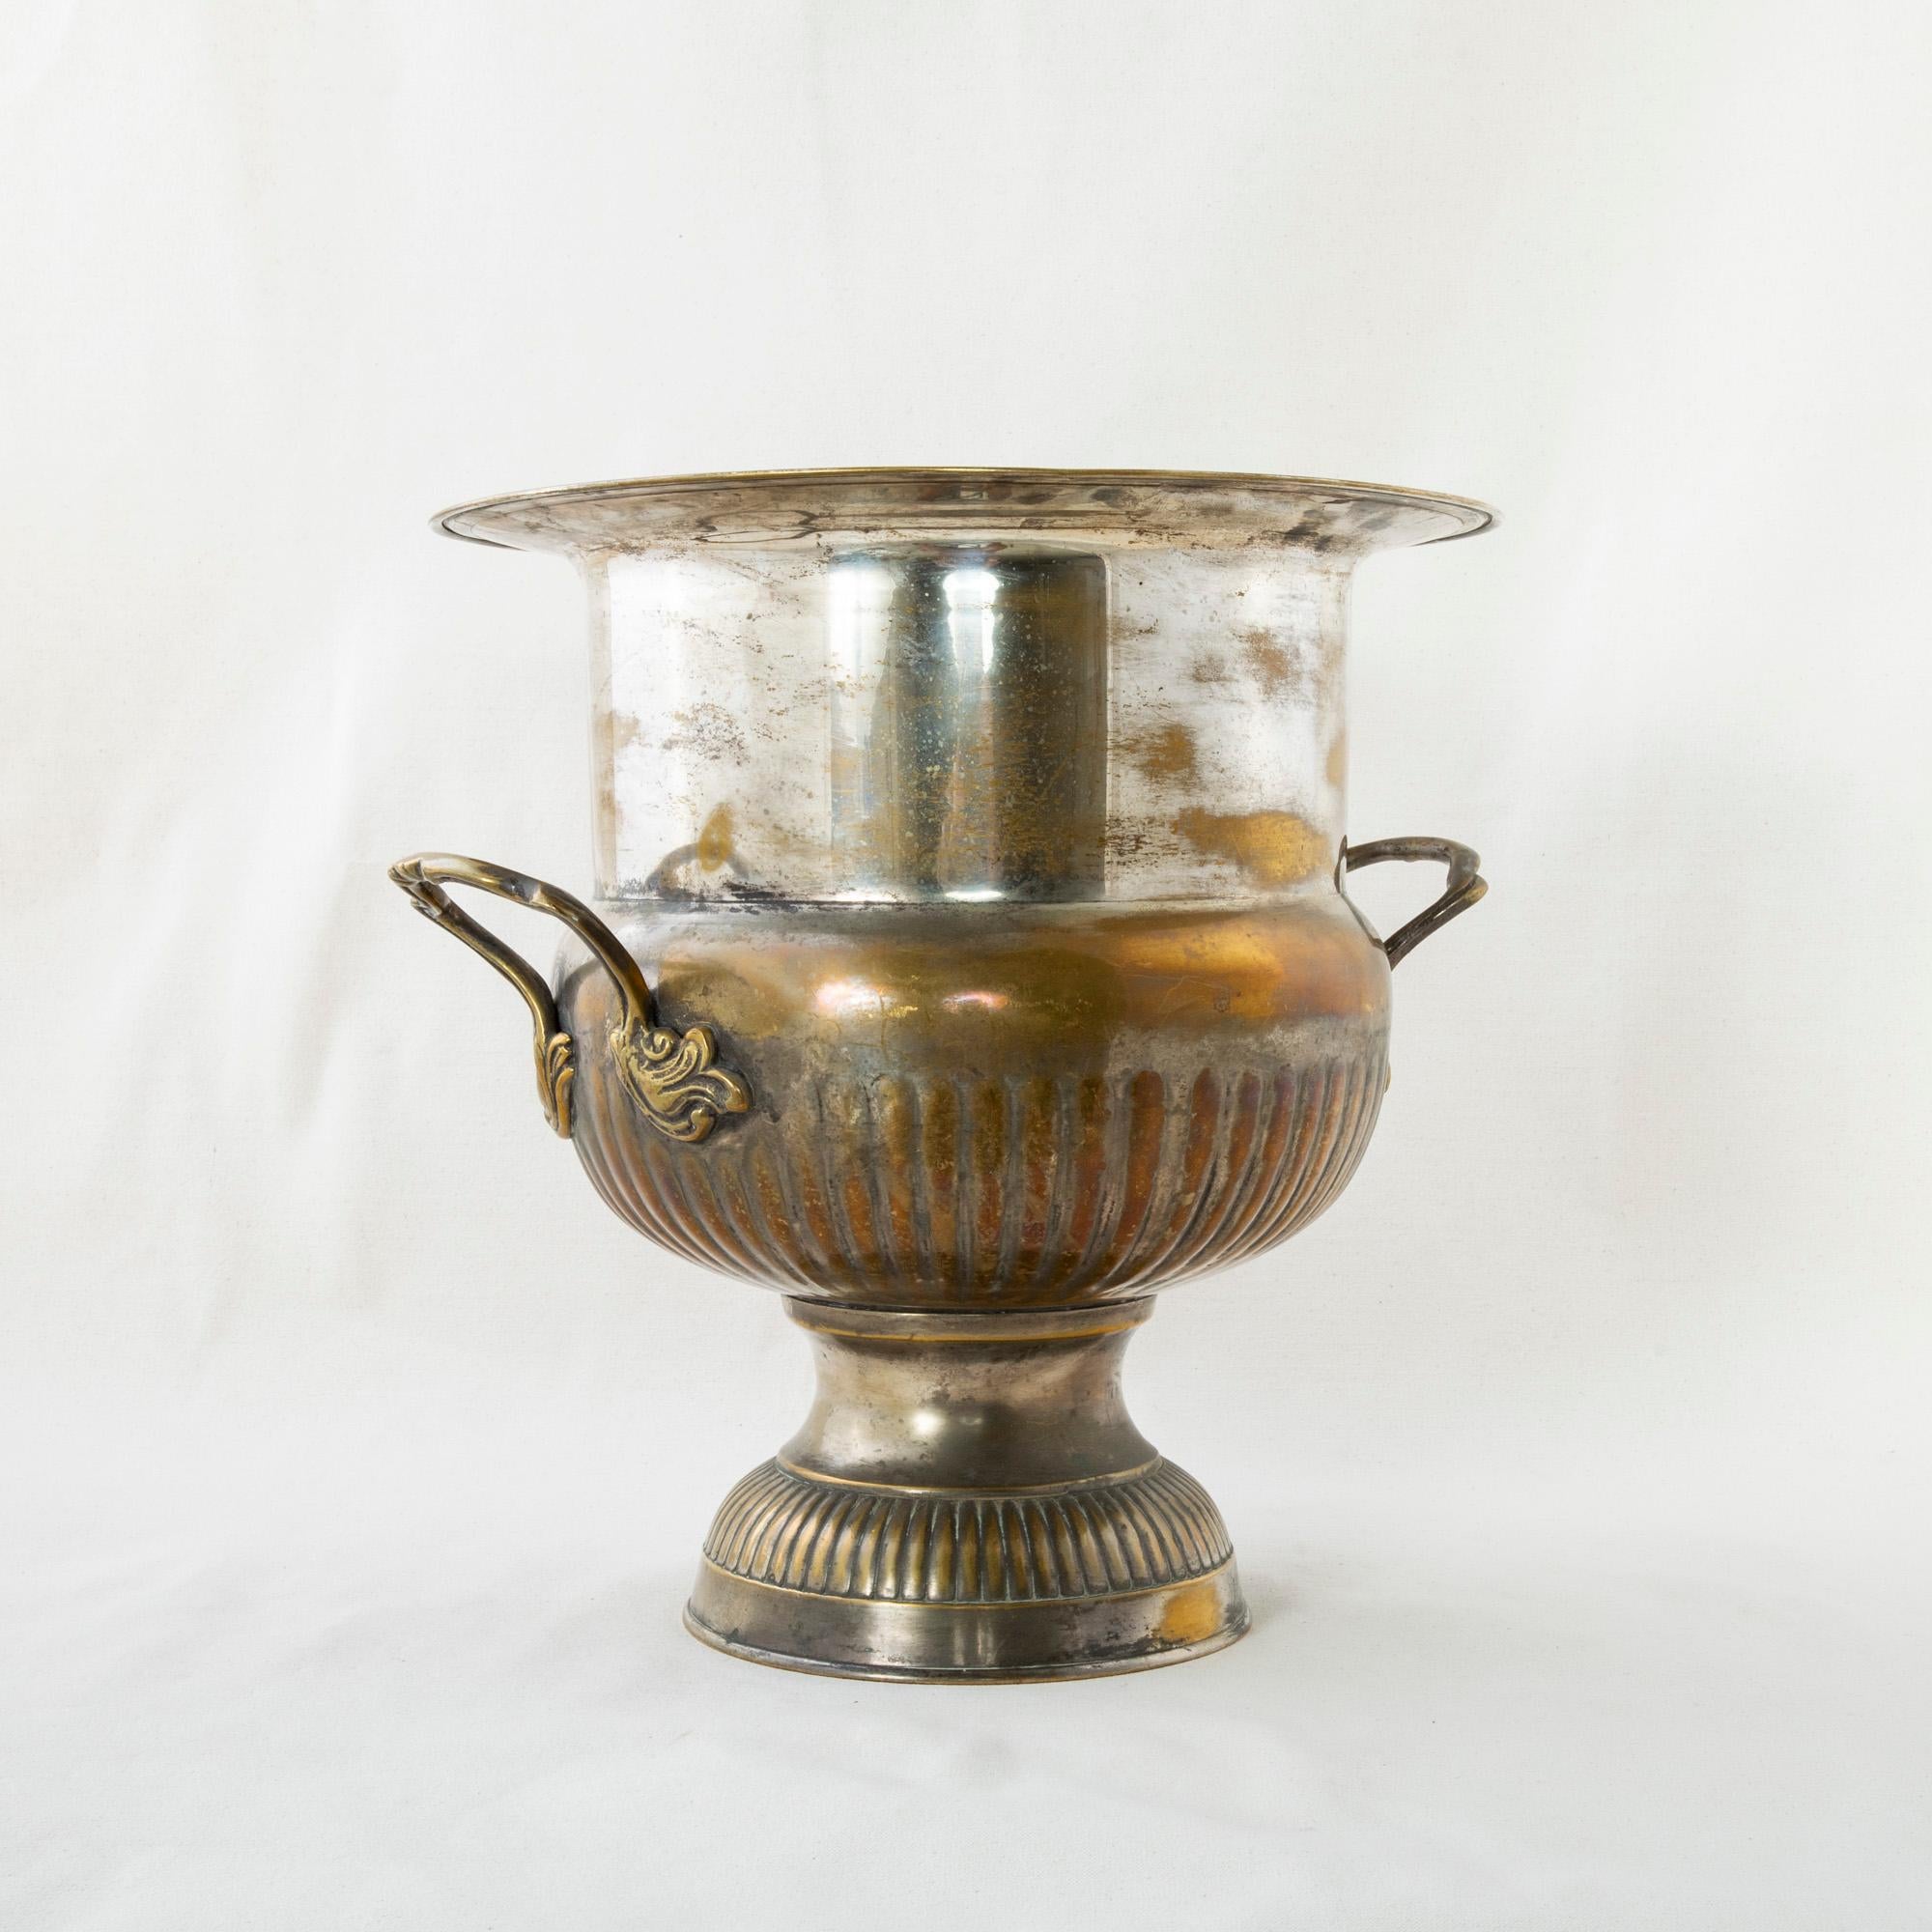 Standing at 14 inches in height, this large mid-twentieth century French silver plate champagne bucket accommodates a magnum bottle. The bucket is fitted with handles detailed with stylized leaves, and rests on a fluted footed base. c. 1950.
  